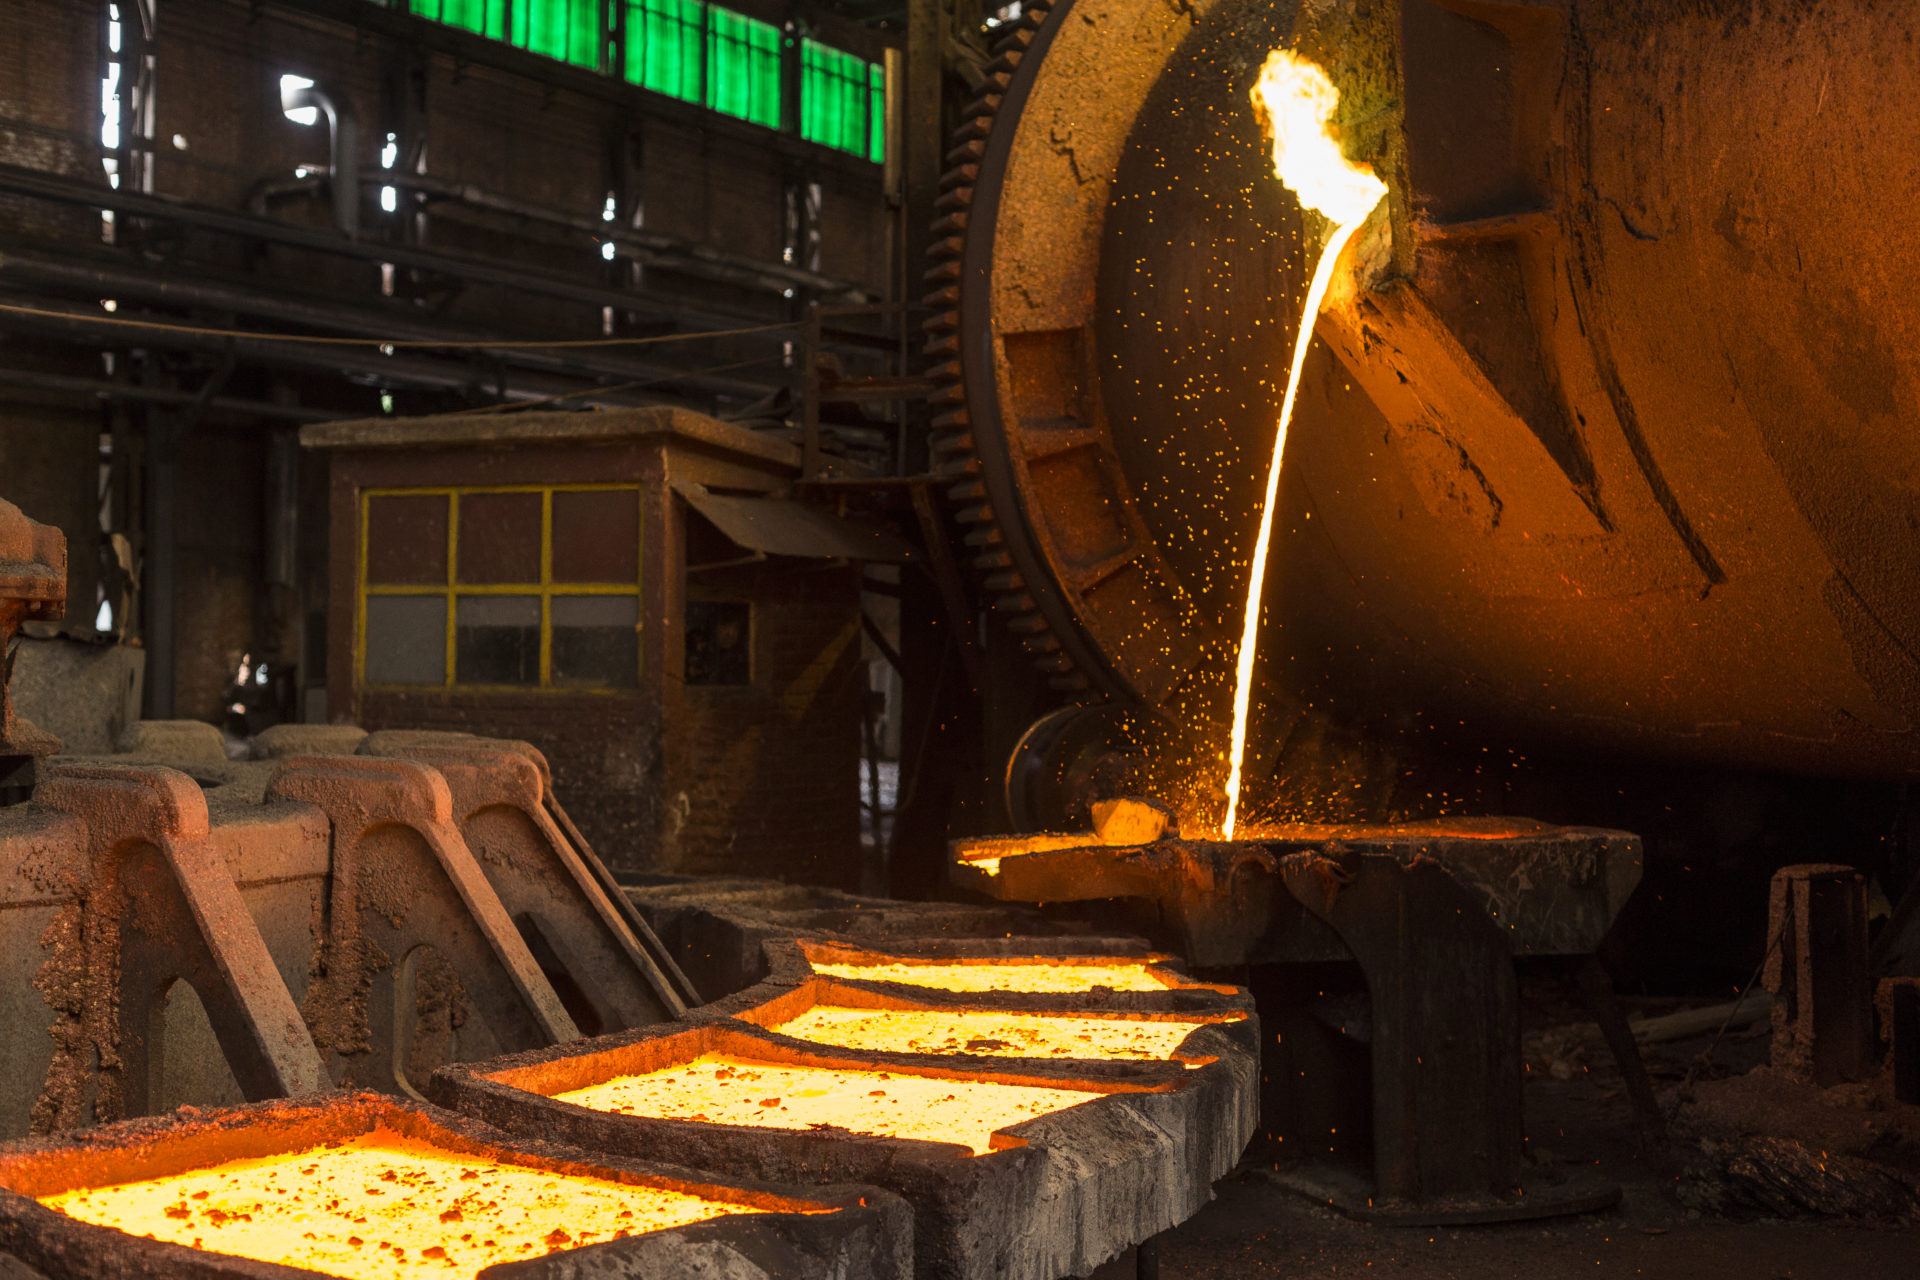 Company Usess Junk Bonds to Convert Aluminum Smelter into a Giant Mining Operation